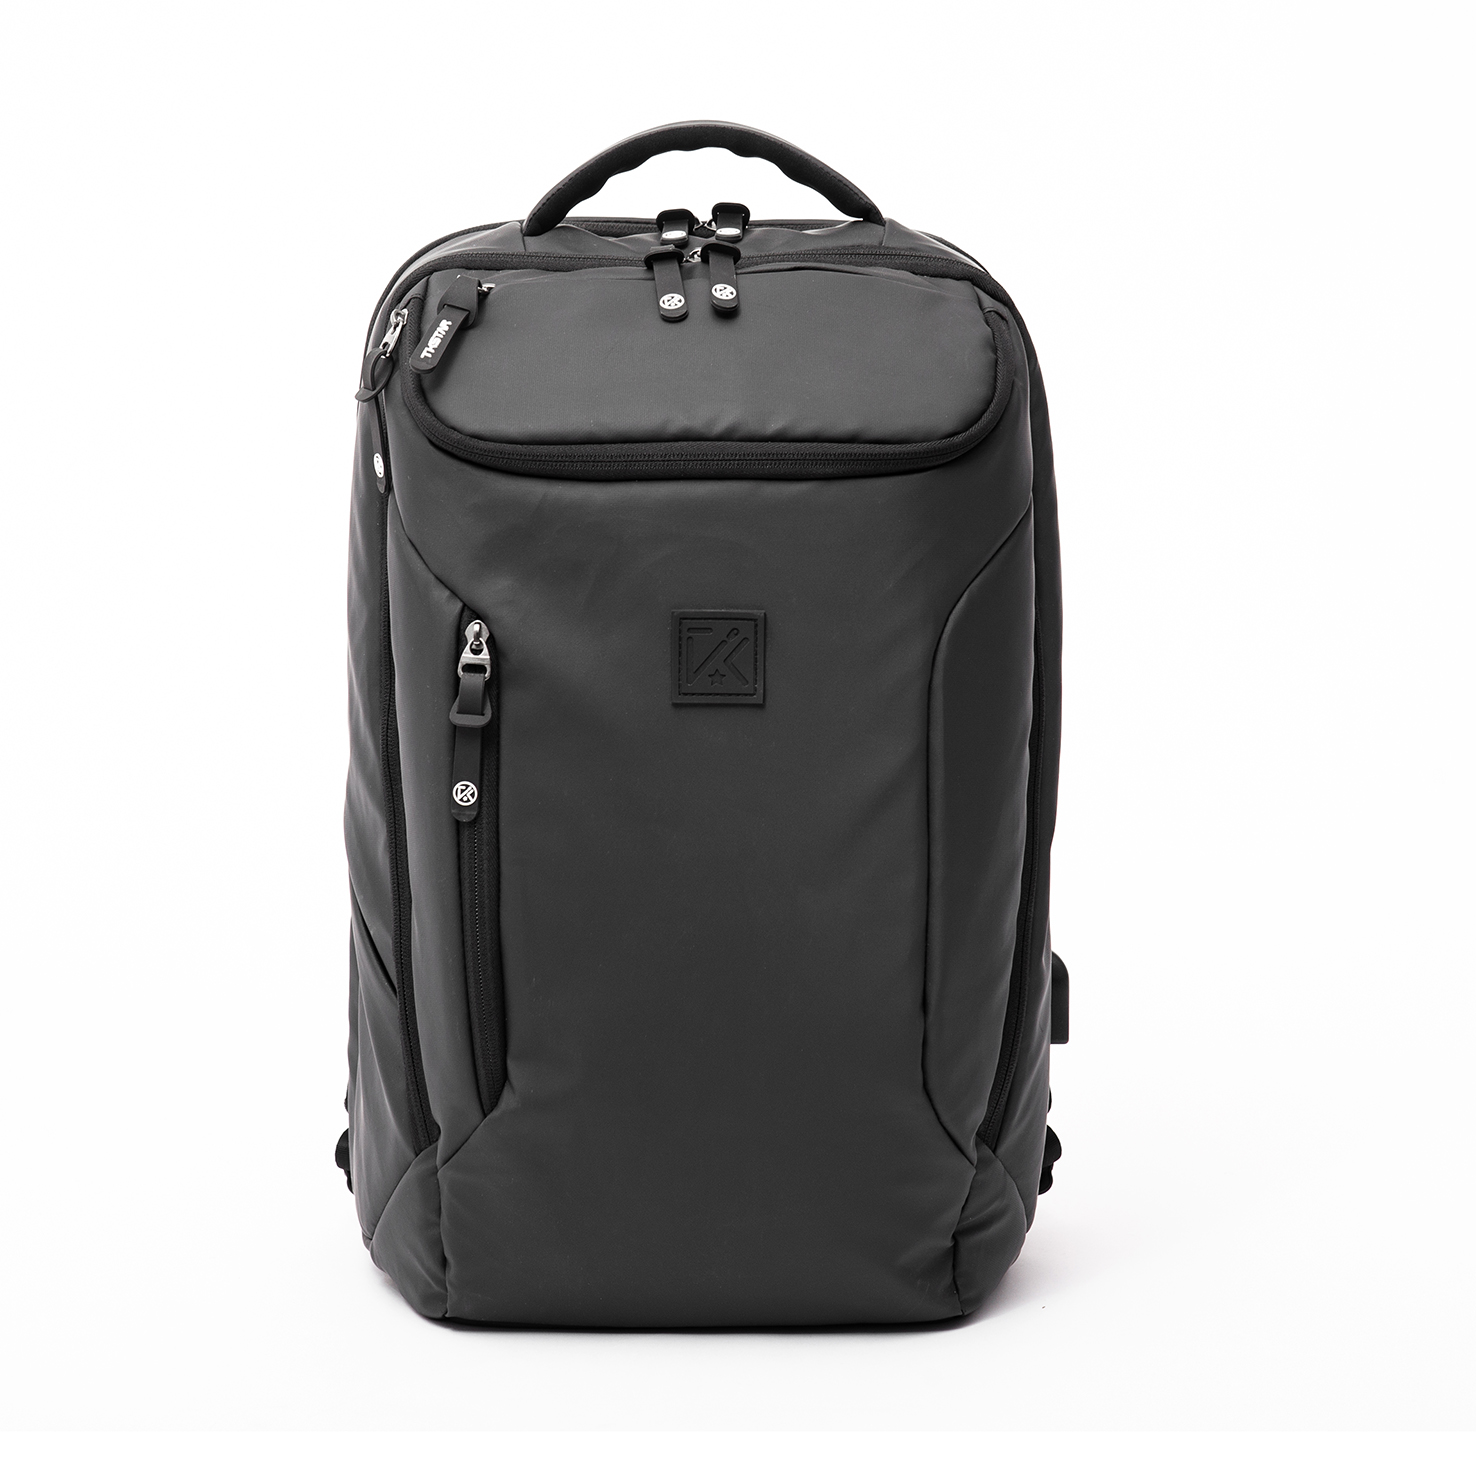 Factory For Travel Zipper Backpacks - Multifunction stylish and fashion business backpack travel bag with laptop compartment – Twinkling Star